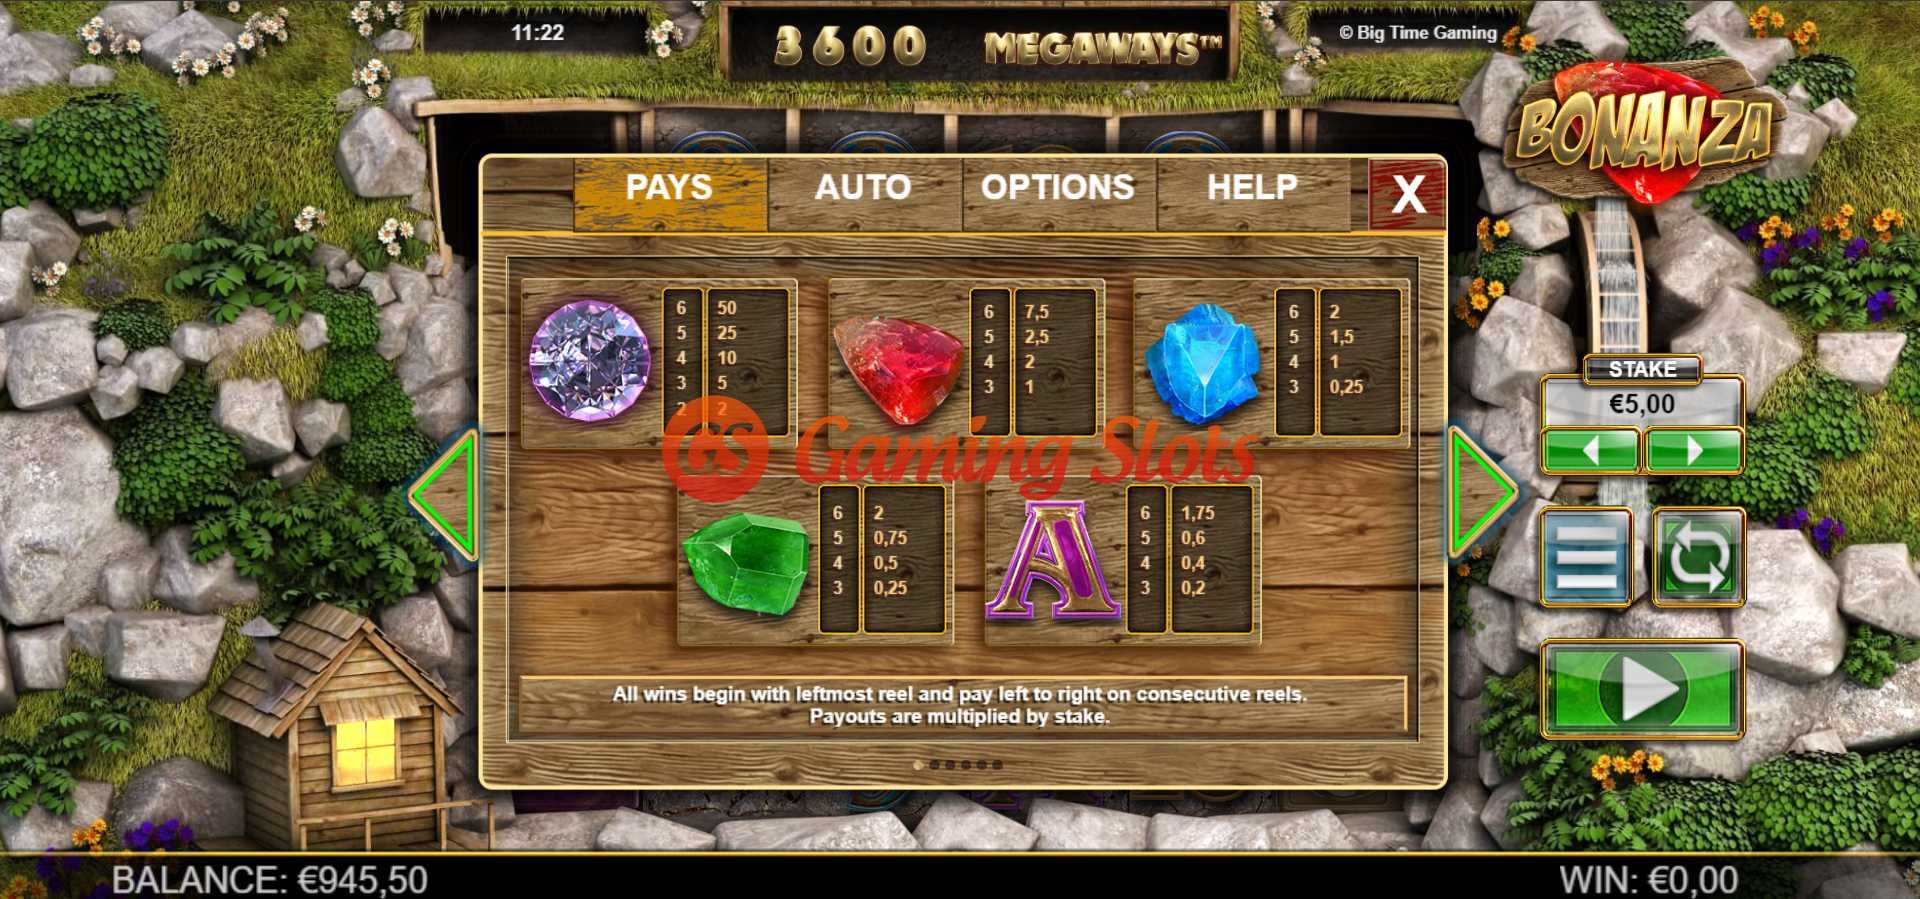 Pay Table for Bonanza slot from Big Time Gaming